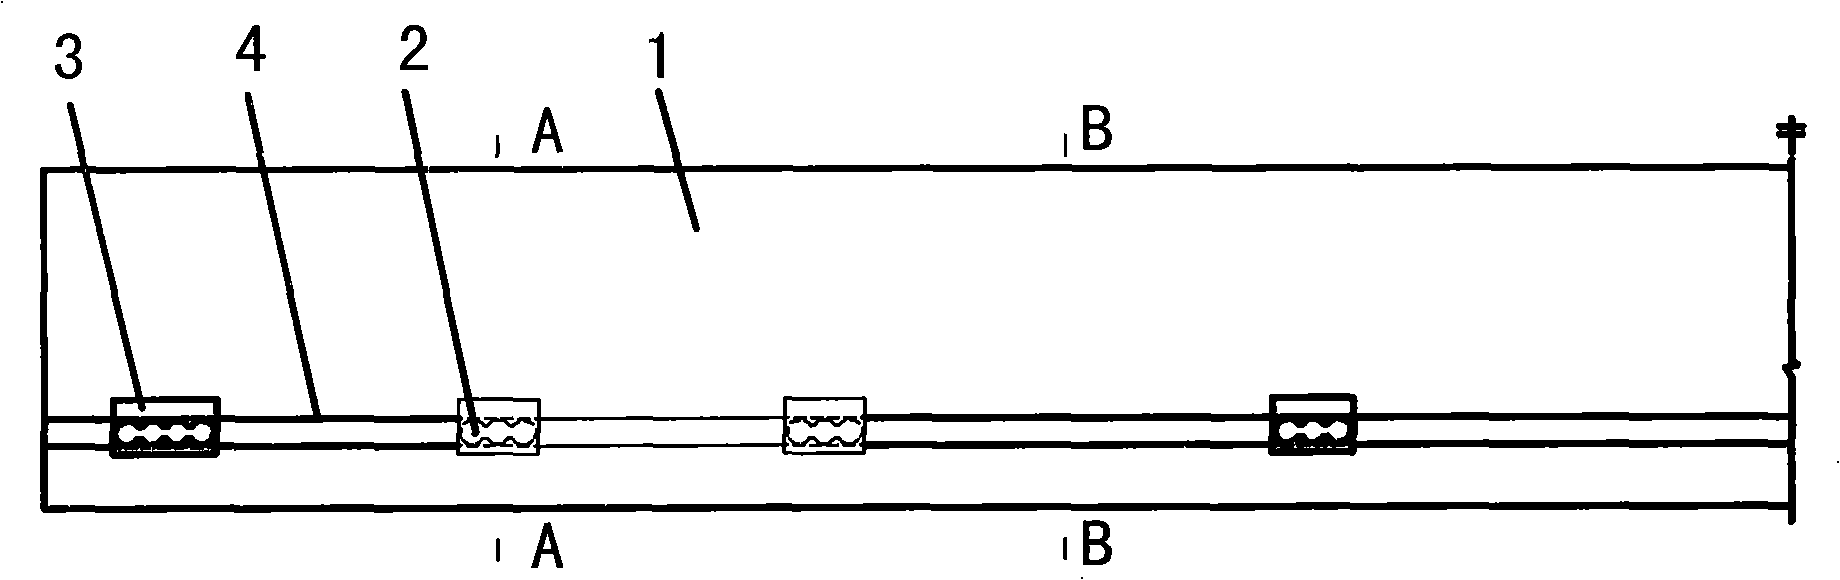 Two-stage unsupported construction method used for repairing damaged hydraulic concrete beams